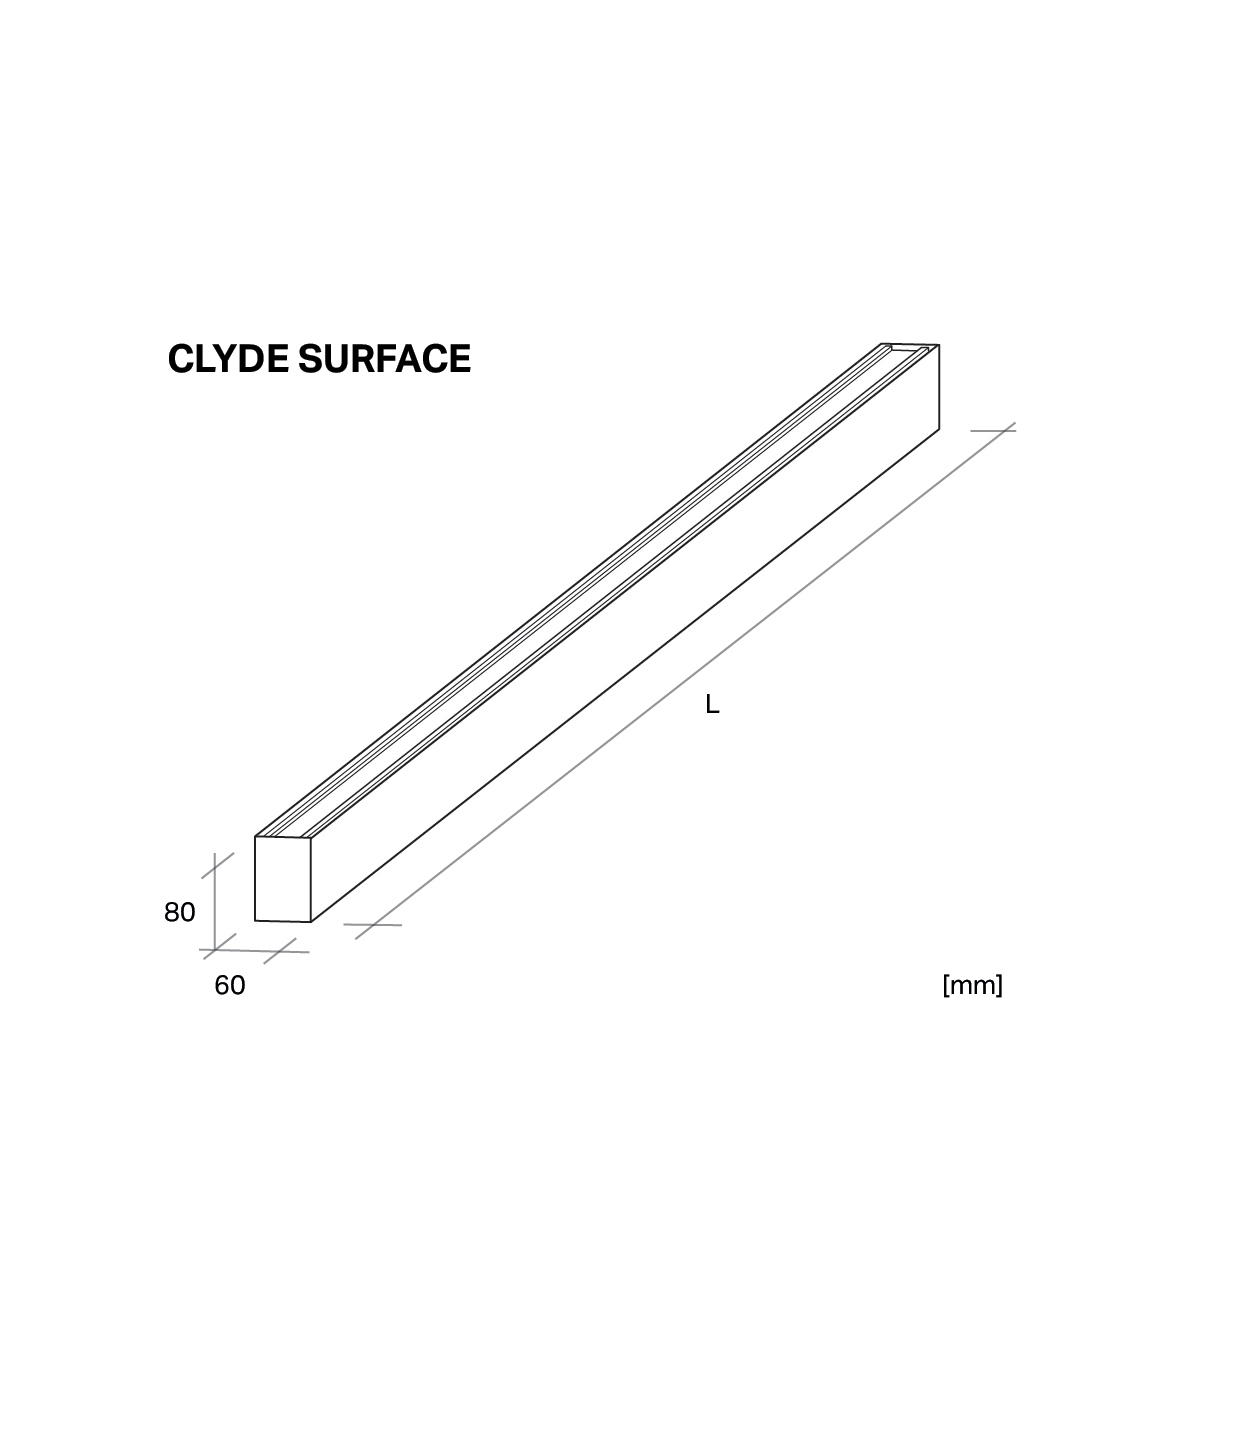 clyde-surface-technical-drawing-hd